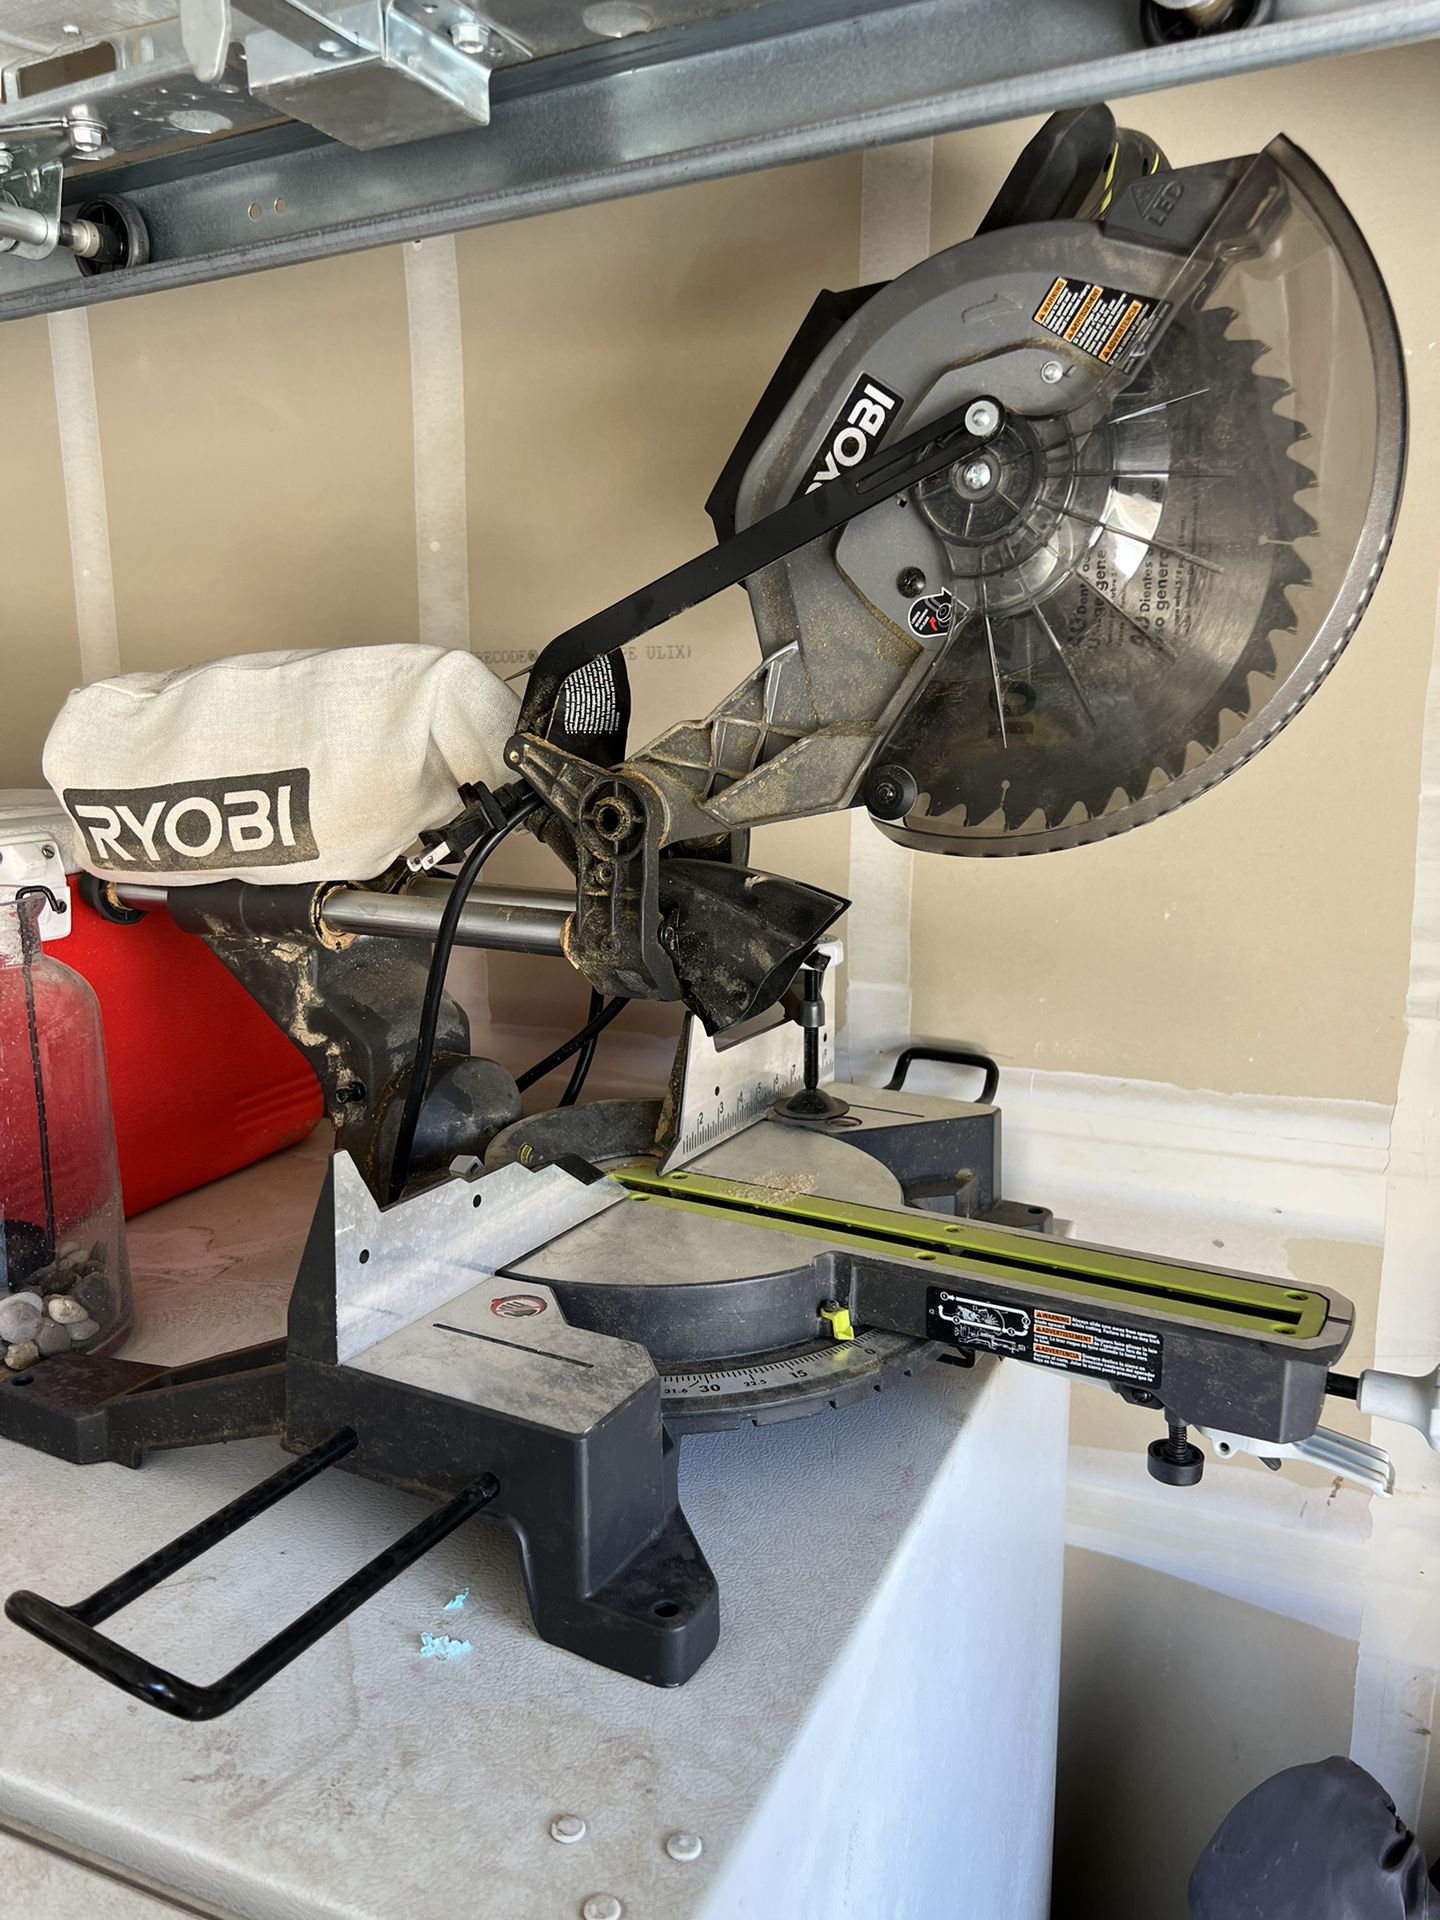 Ryobi Miter saw for Sale in Patterson, CA OfferUp